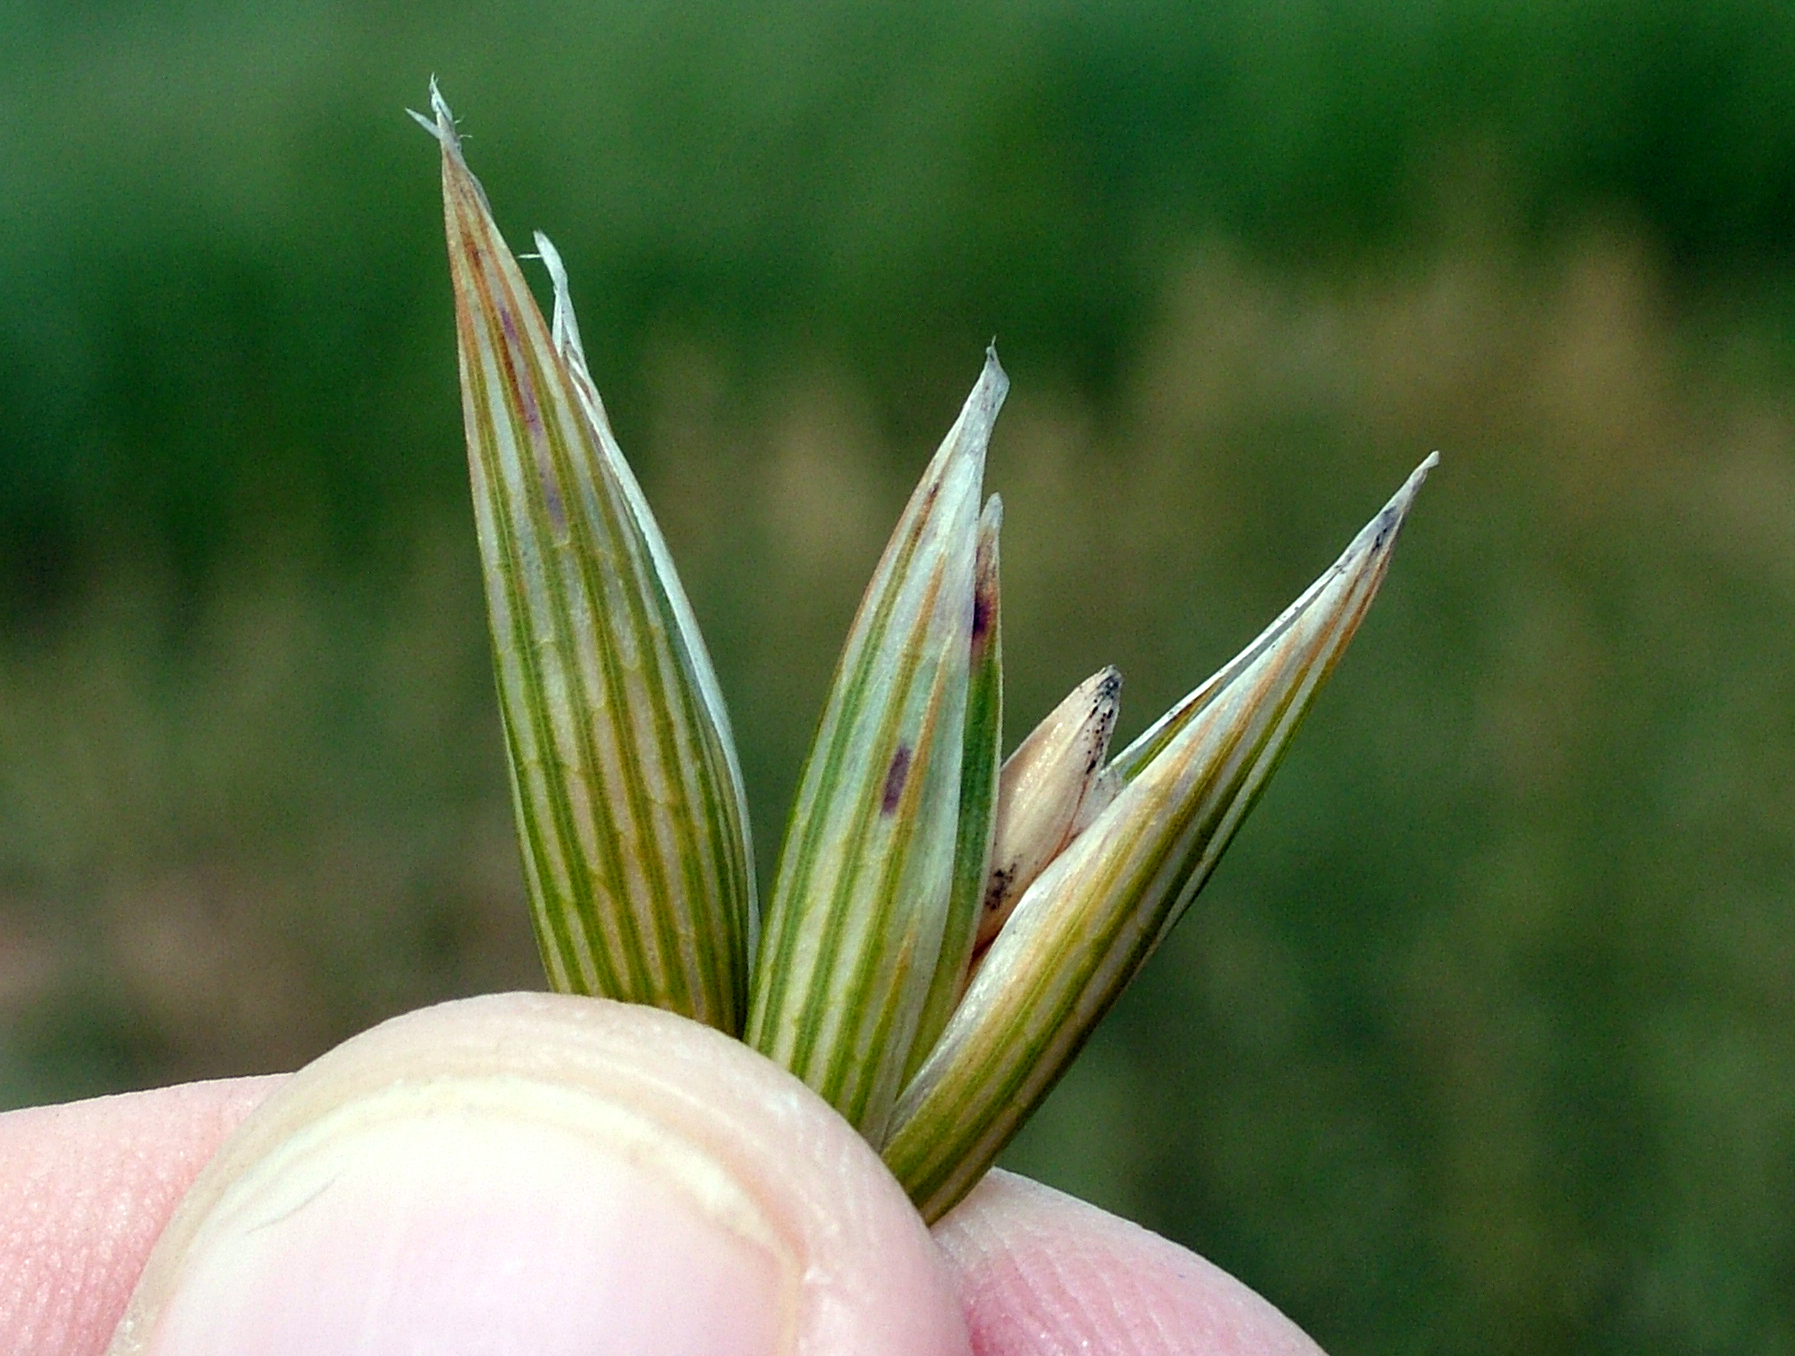 Tan spot damage on an oat spikelet. Details in text following the image.